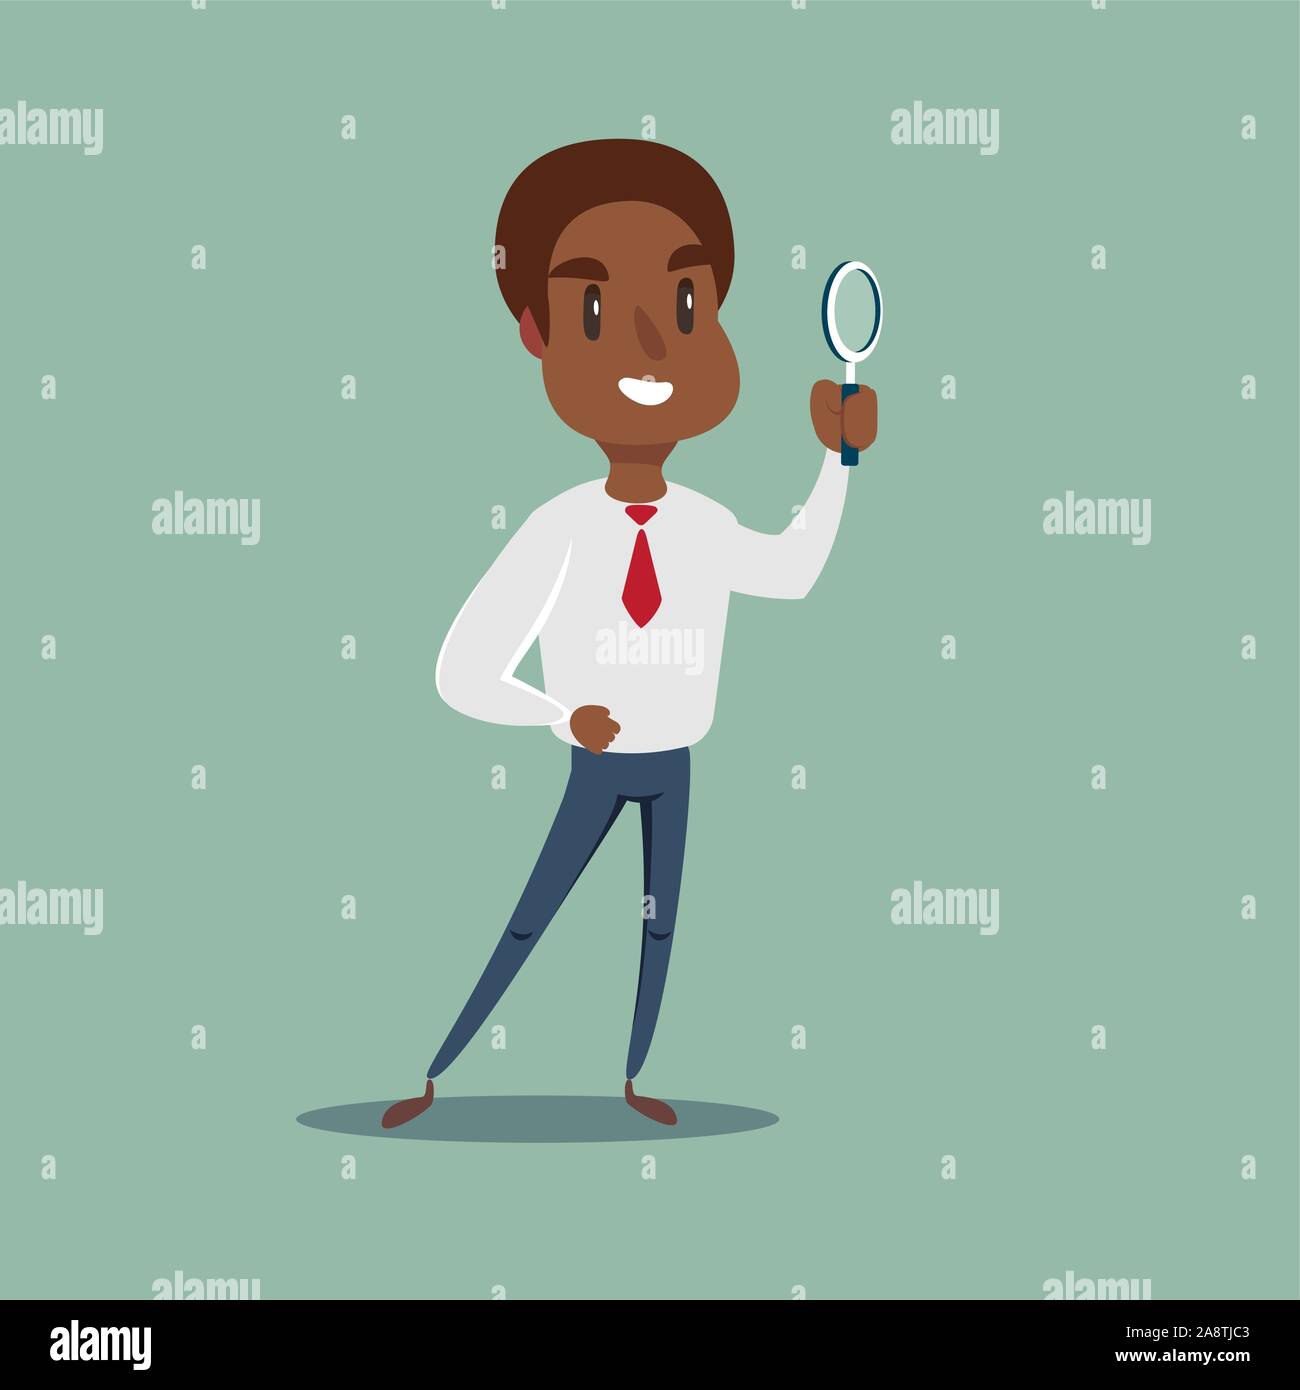 African Manager character looking through a magnifying glass. Stock Vector